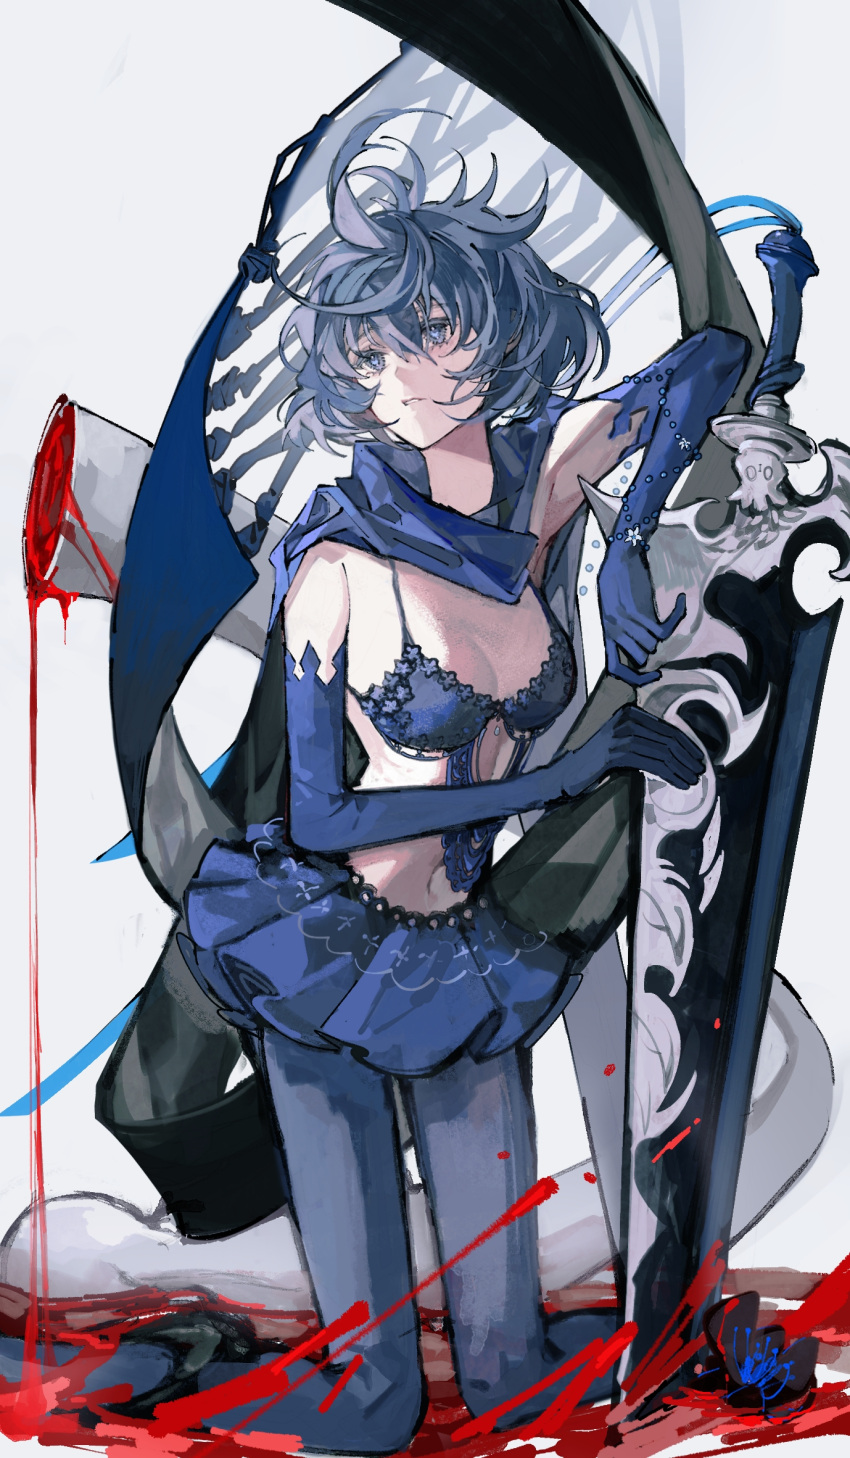 1girl 1mayusibayu arm_up blood blue_eyes blue_gloves blue_hair blue_leggings bra drag-on_dragoon drag-on_dragoon_3 floating_hair gloves highres kneeling leaning_on_object leggings planted planted_sword scarf short_hair skirt solo sword two_(drag-on_dragoon) underwear weapon